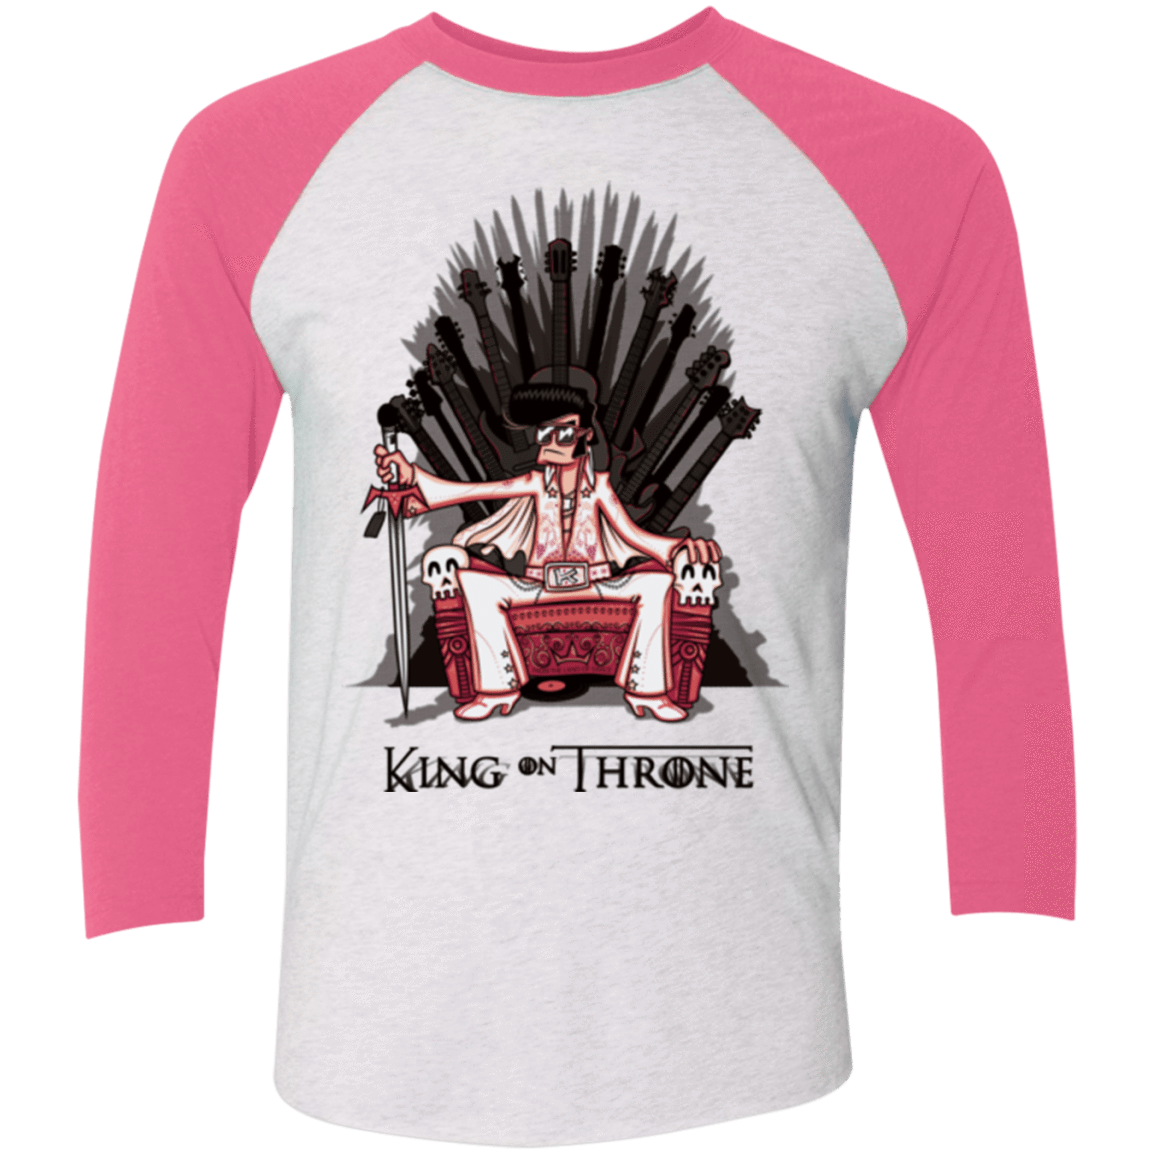 T-Shirts Heather White/Vintage Pink / X-Small King on Throne Men's Triblend 3/4 Sleeve